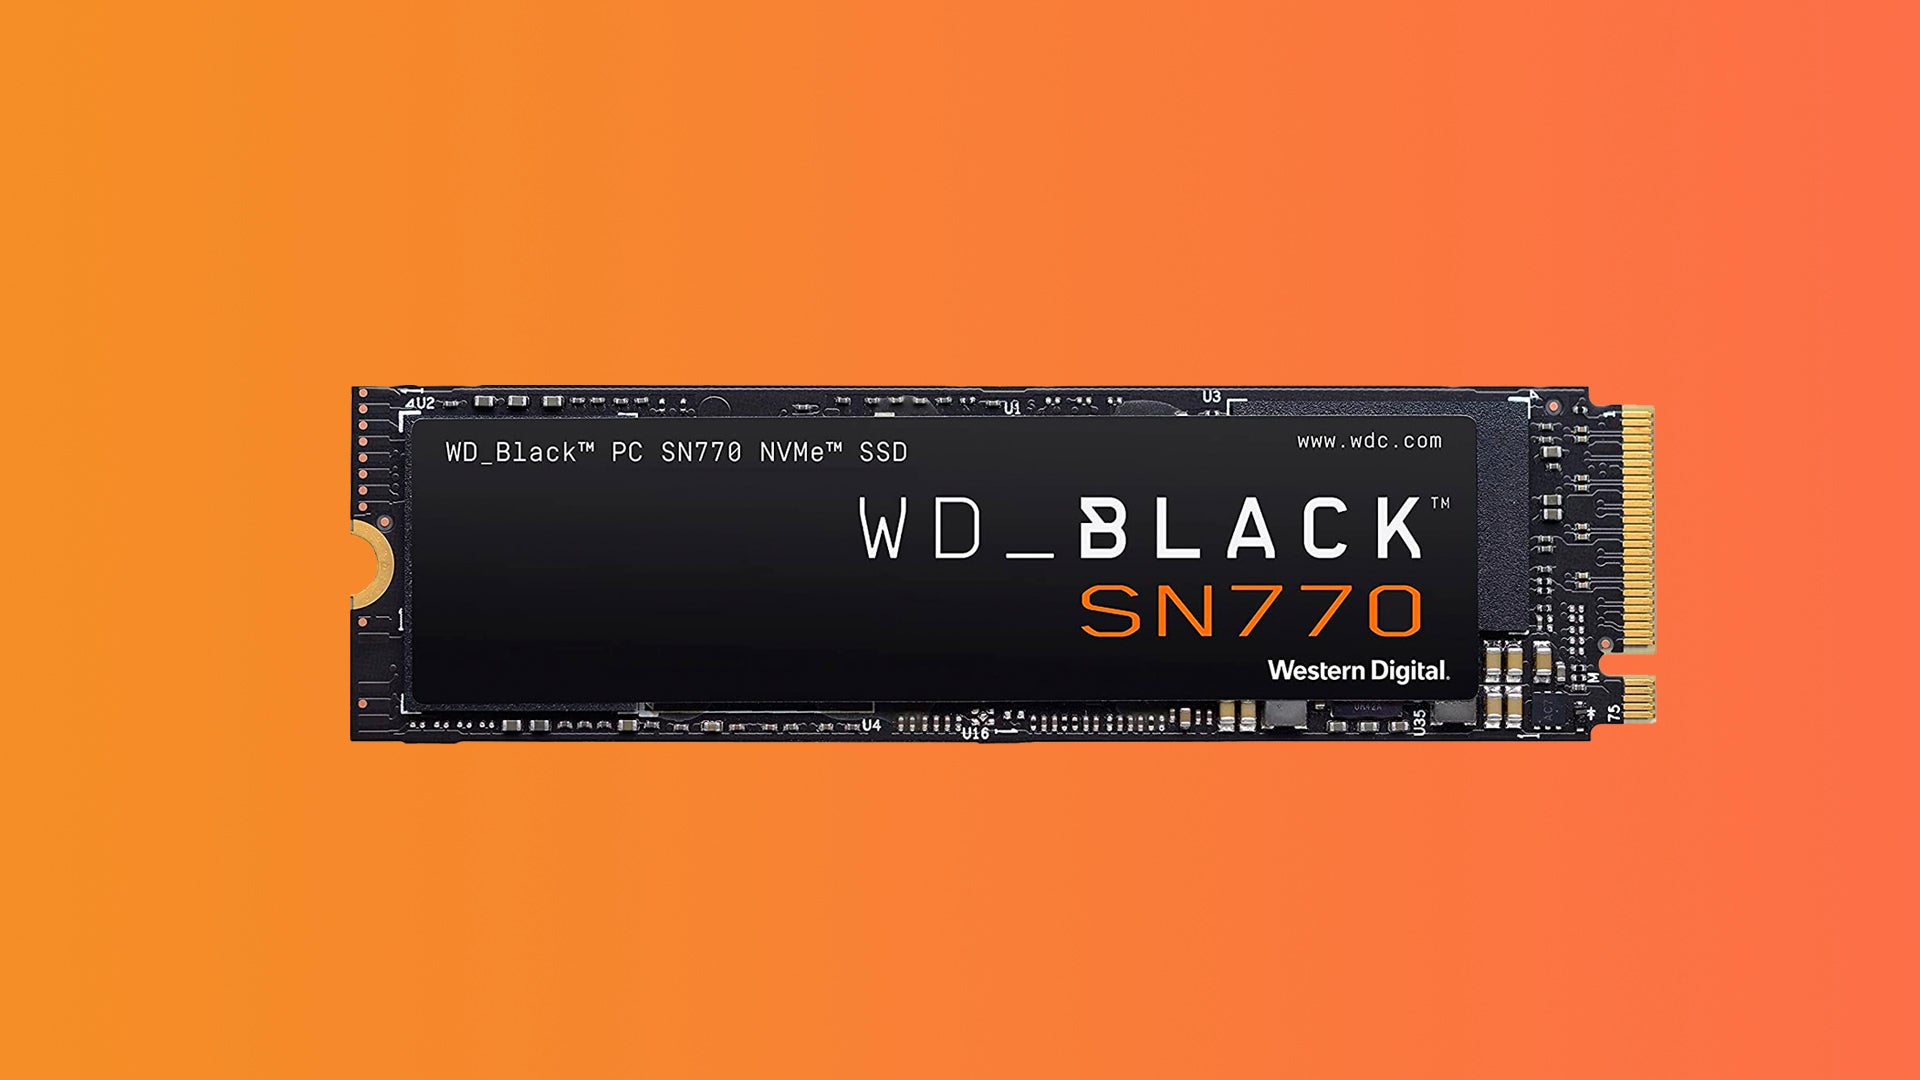 Add speedy storage to your PC for less with this amazing WD Black